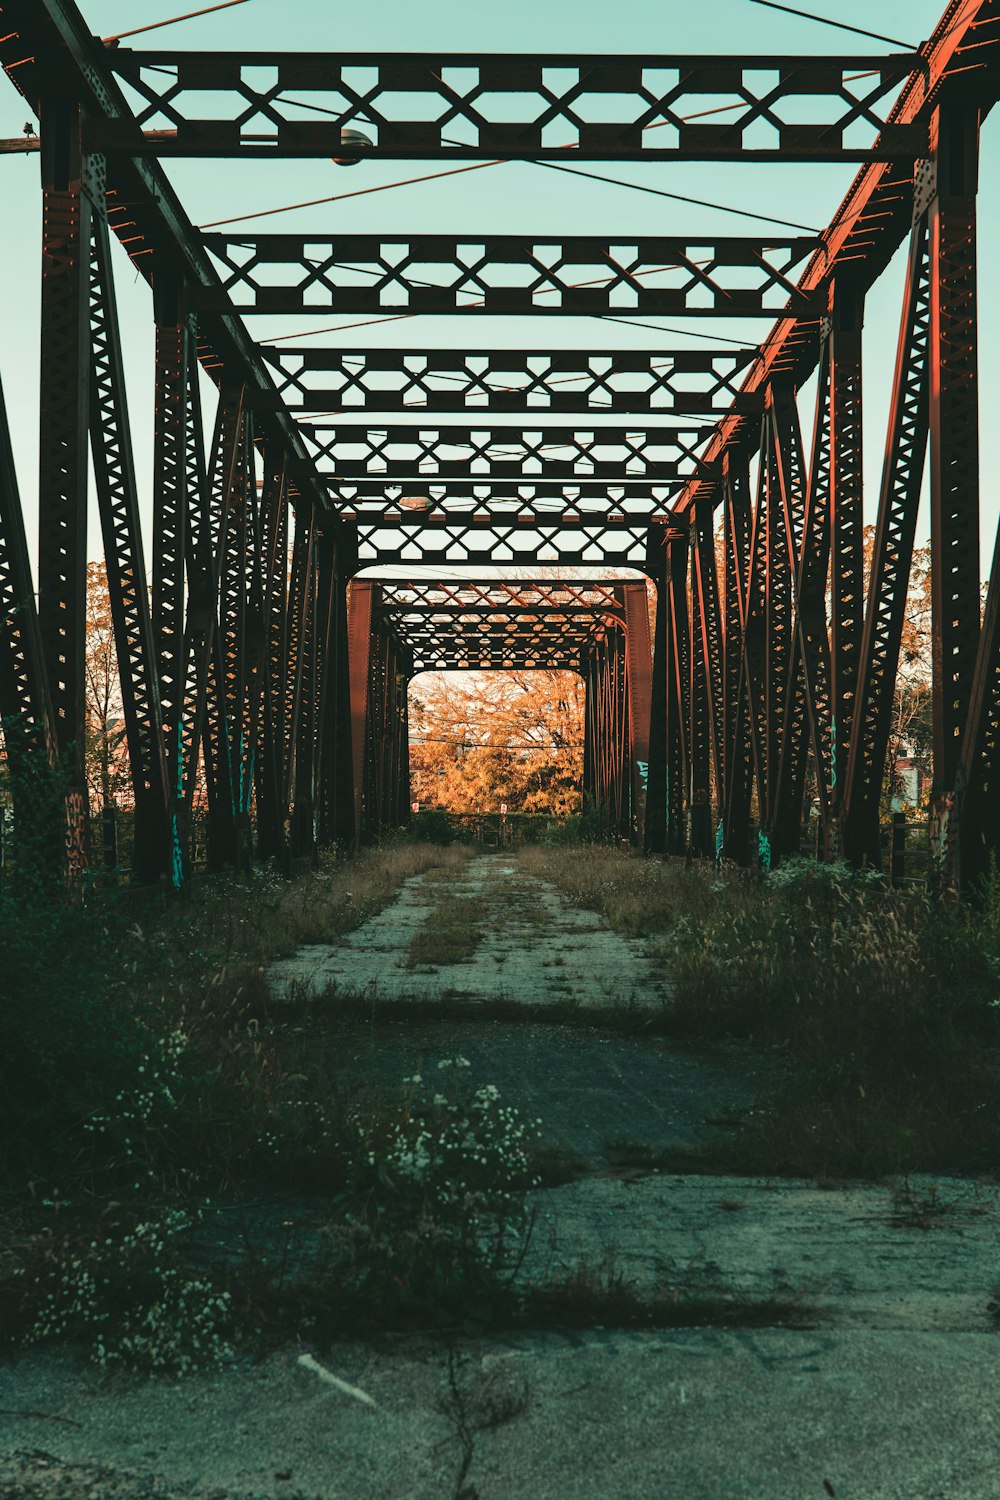 a view of an old bridge from the ground